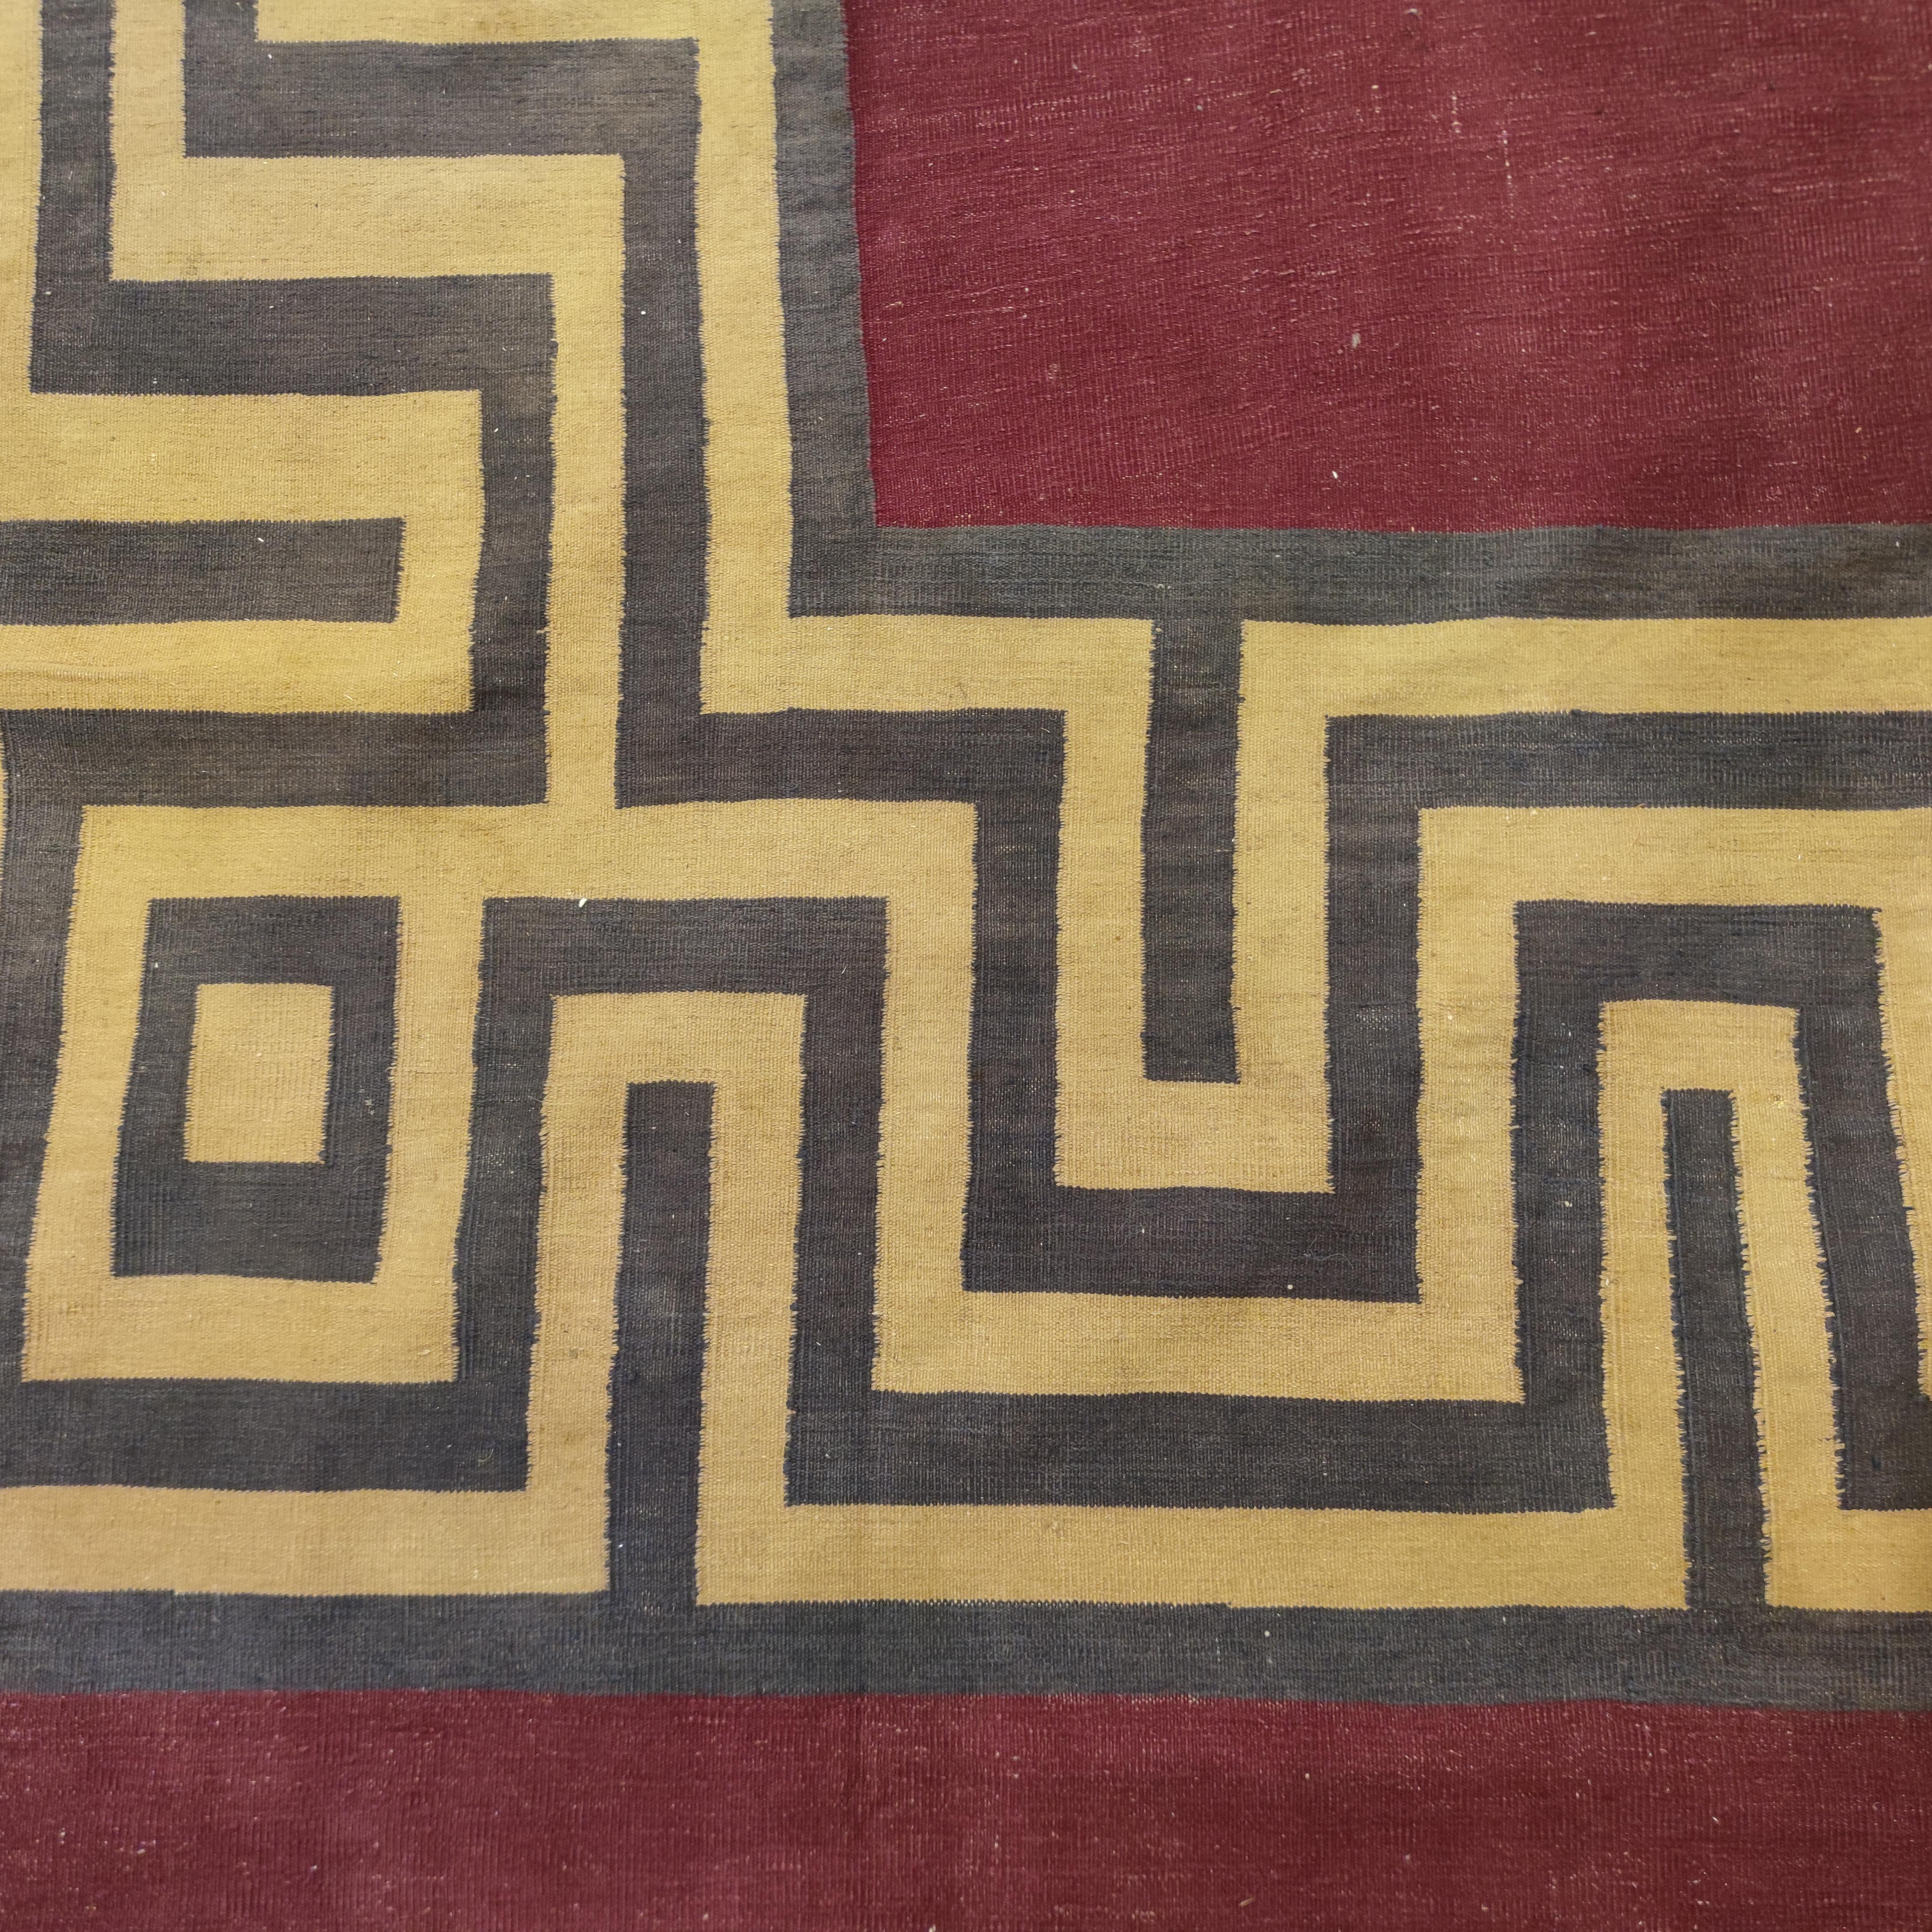 Agra Antique Indian Square Cotton Dhurrie with Geometric Border, Circa 1900 For Sale